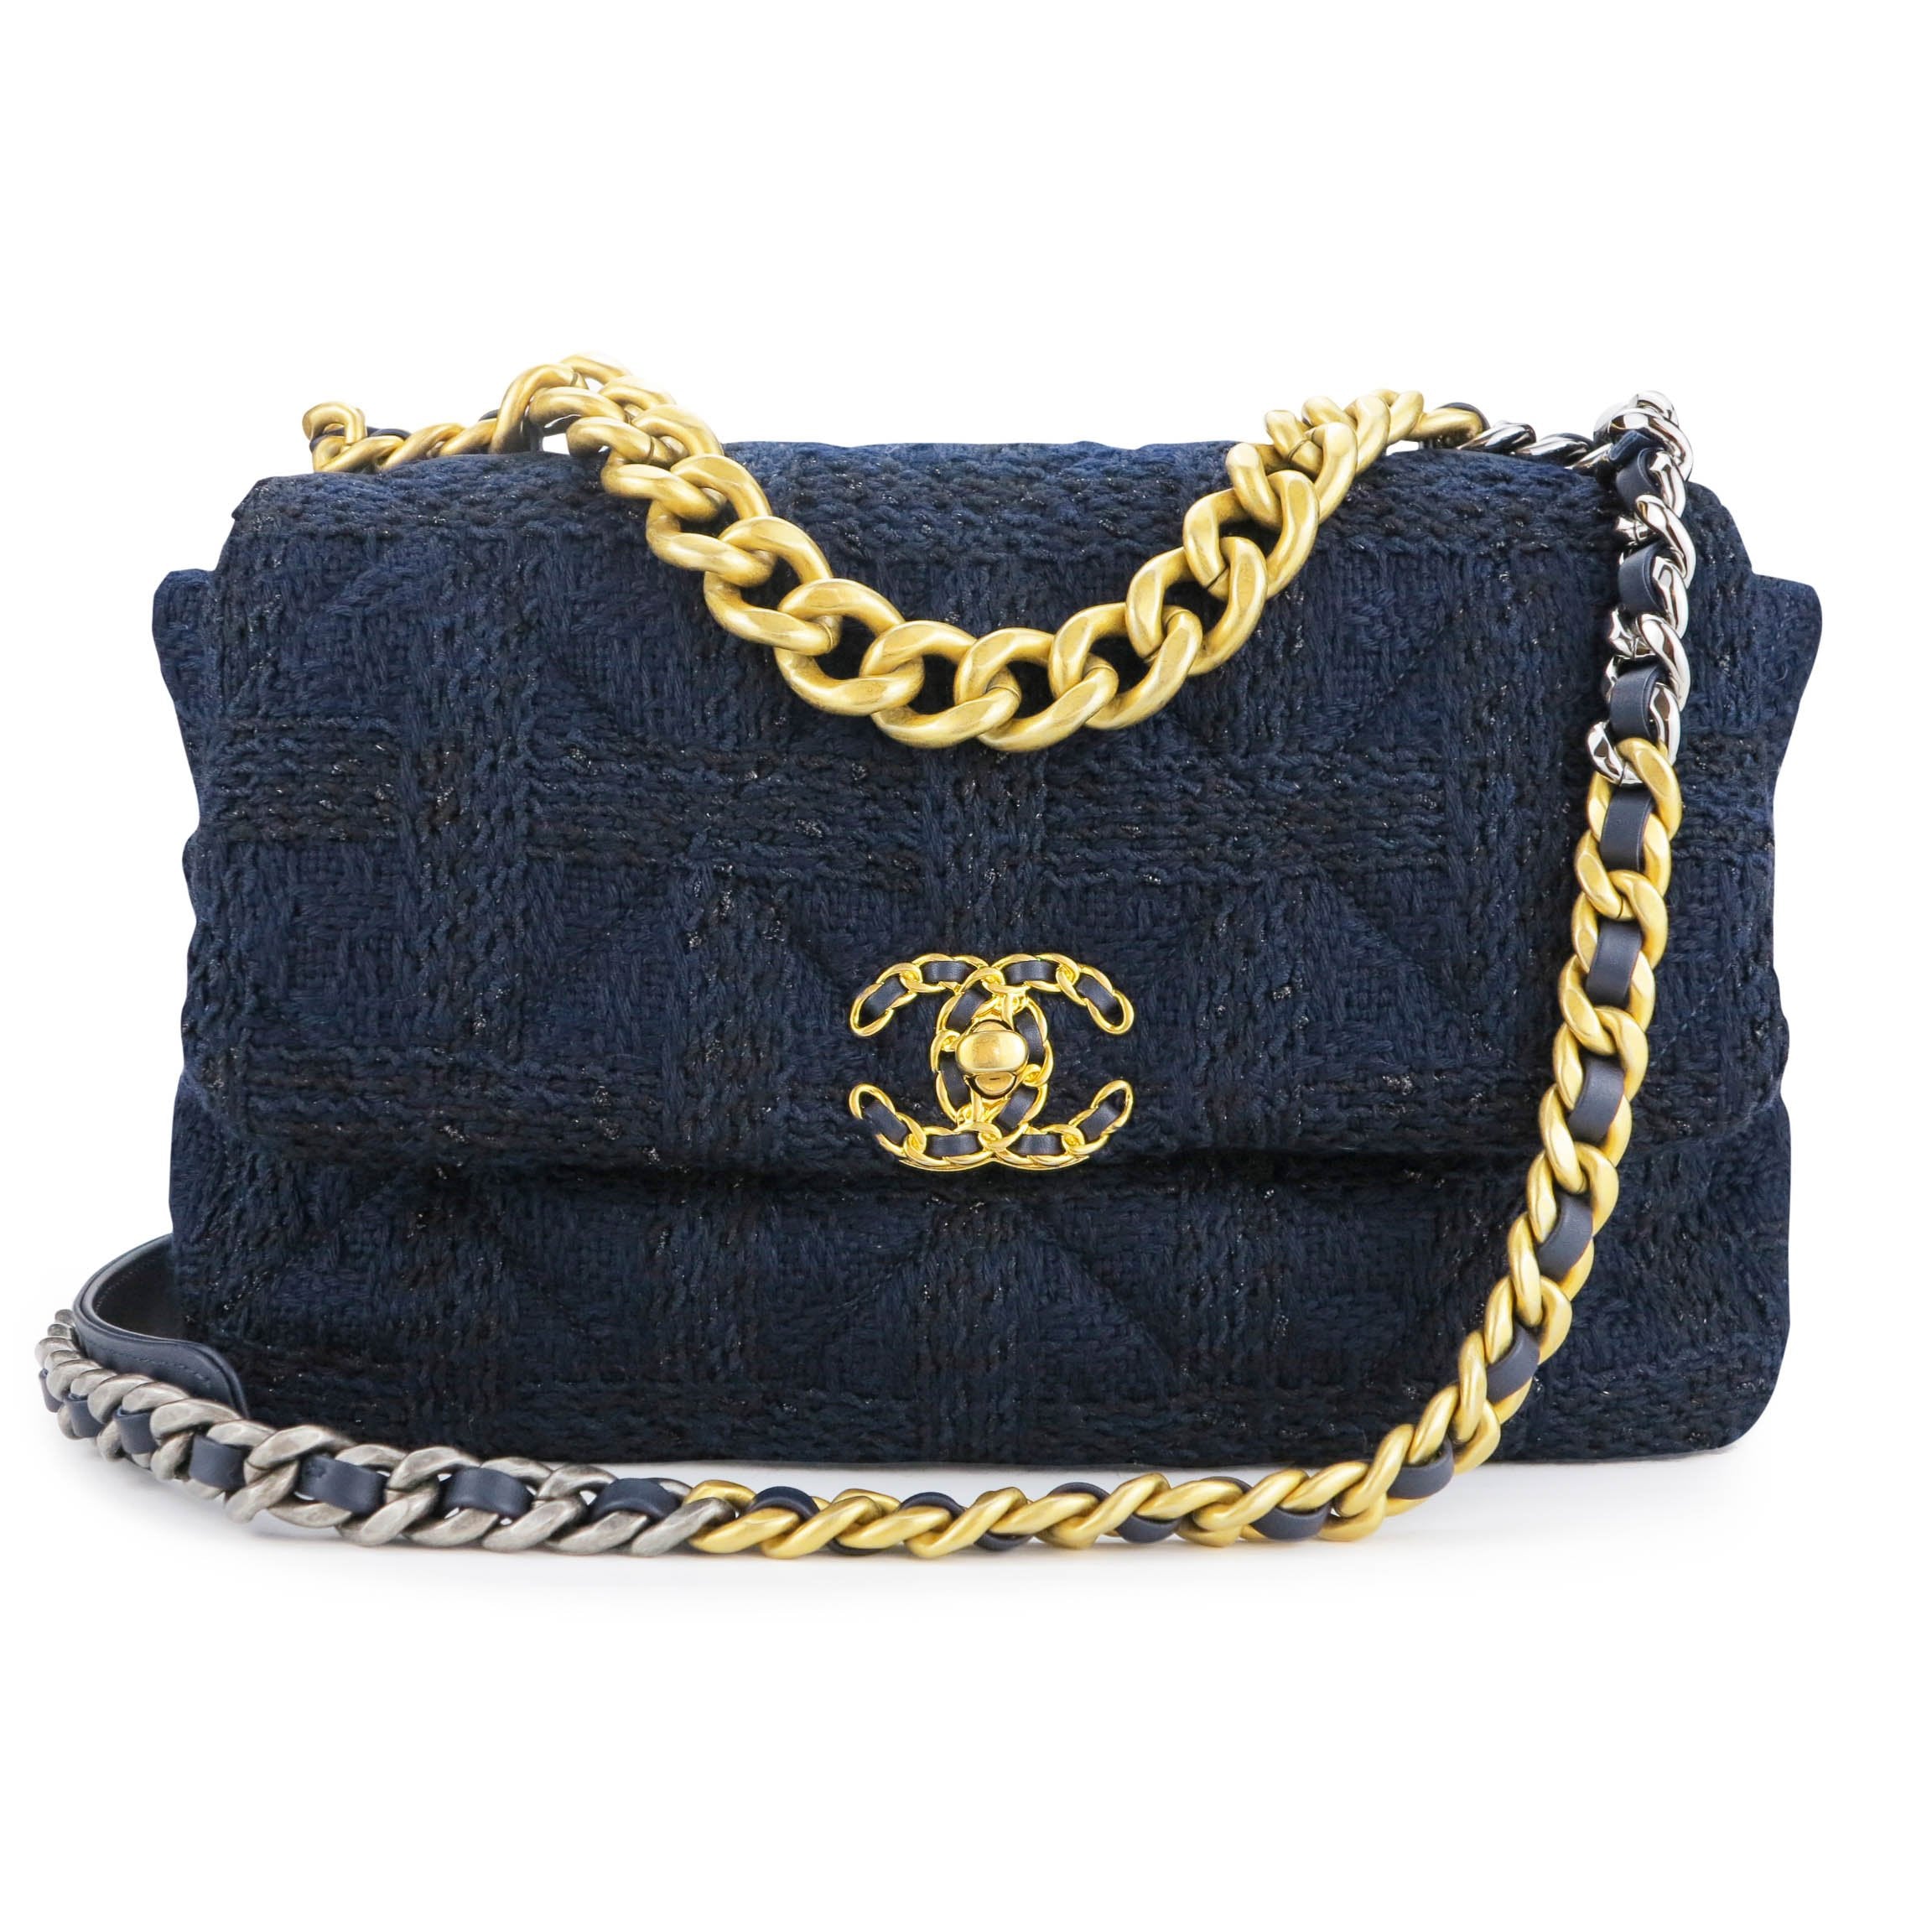 CHANEL Tweed Quilted Medium Chanel 19 Flap Black Navy Gold 648980